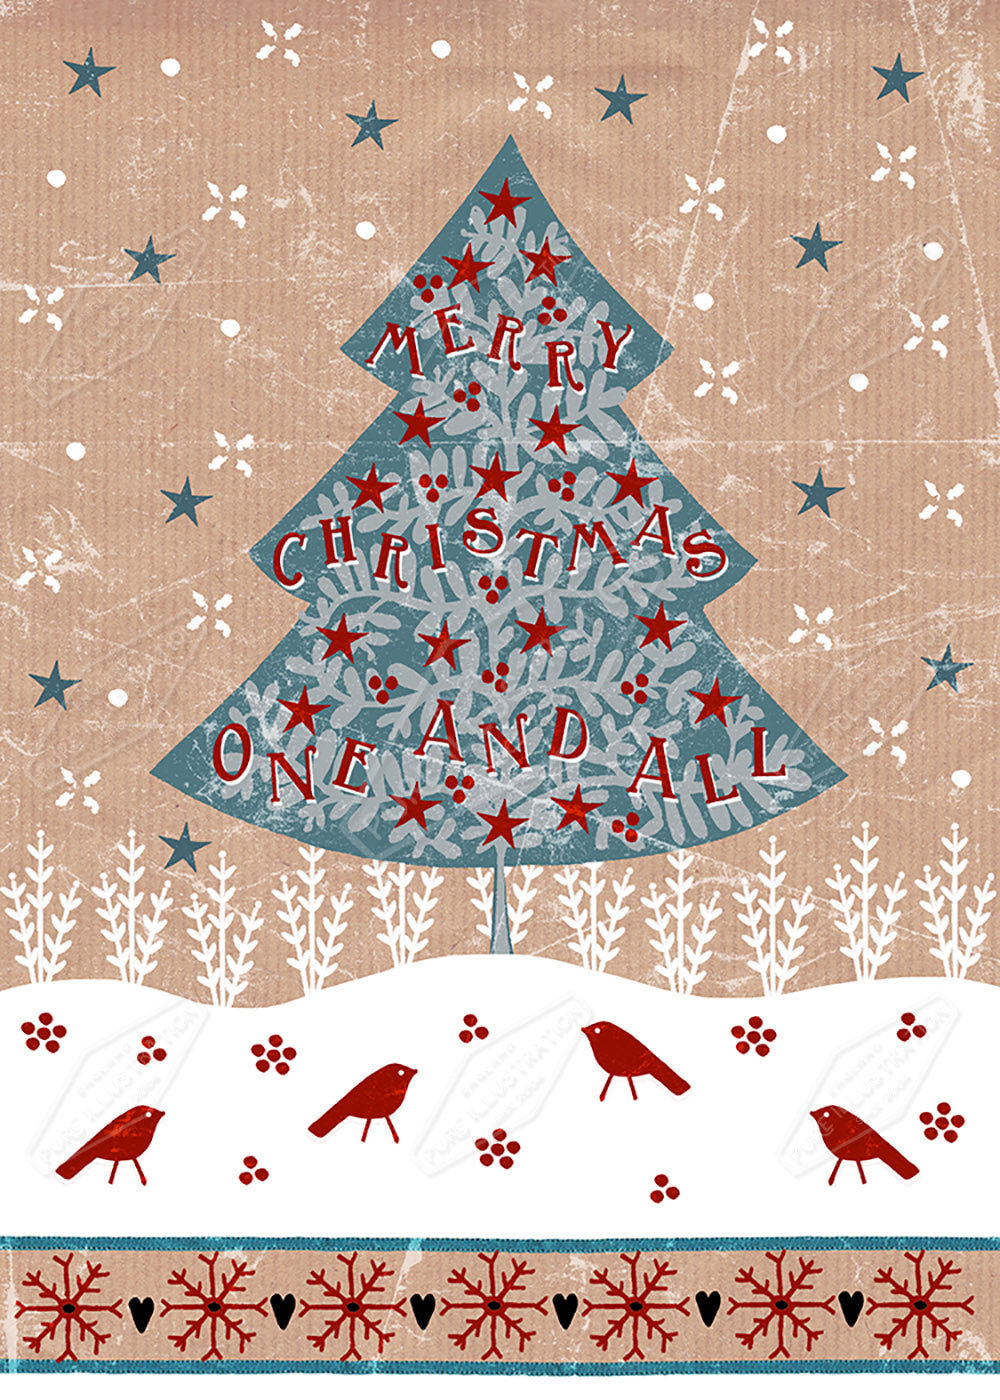 00024240SSN- Sian Summerhayes is represented by Pure Art Licensing Agency - Christmas Greeting Card Design